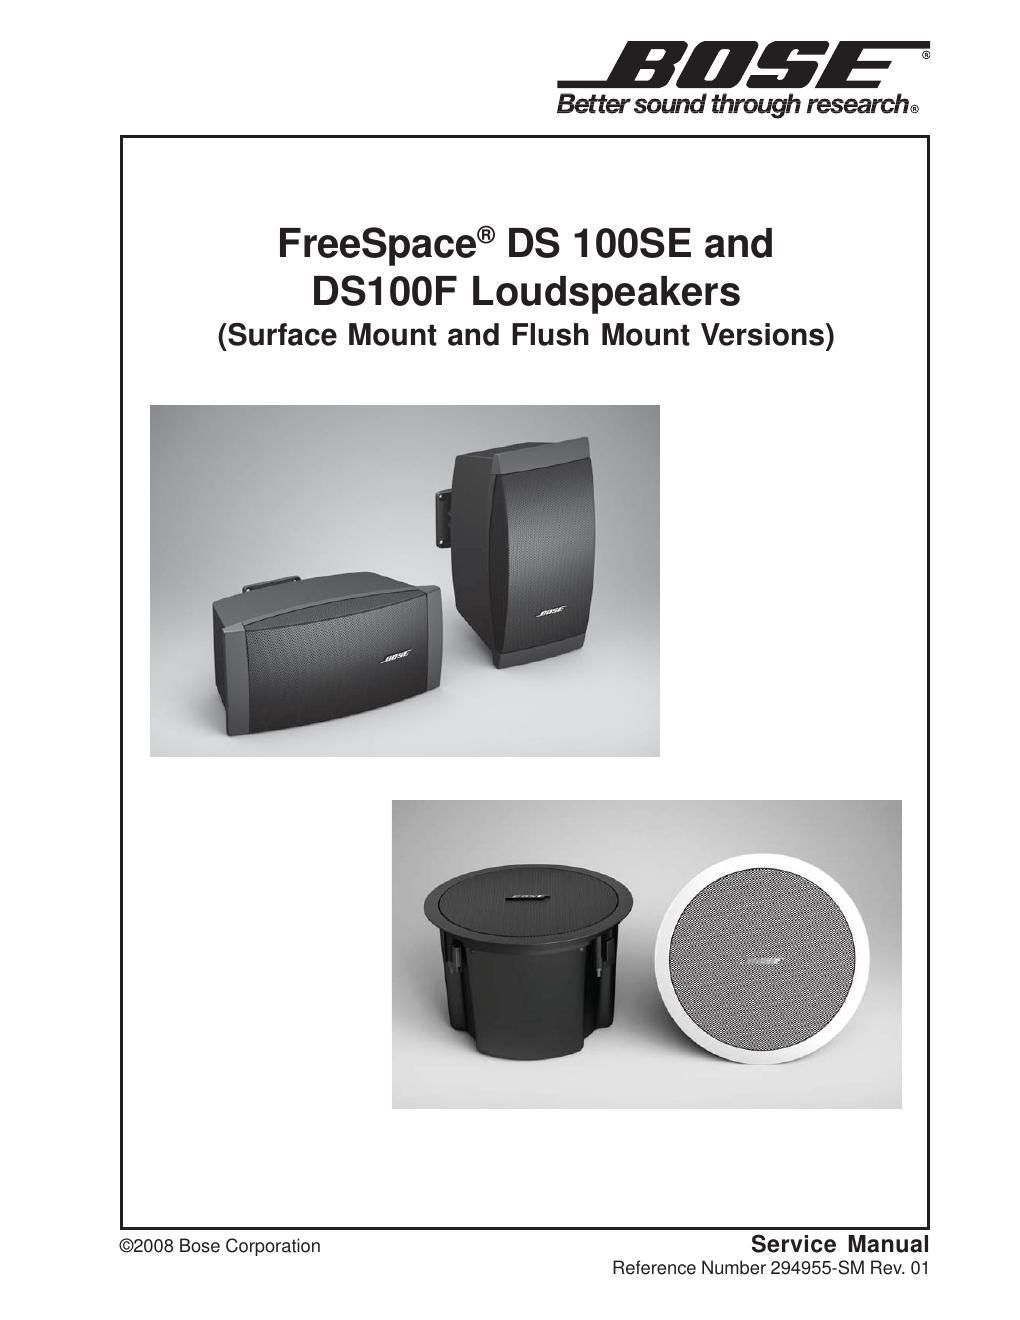 bose freespace ds 100se and ds100f 294955 service manual rev1